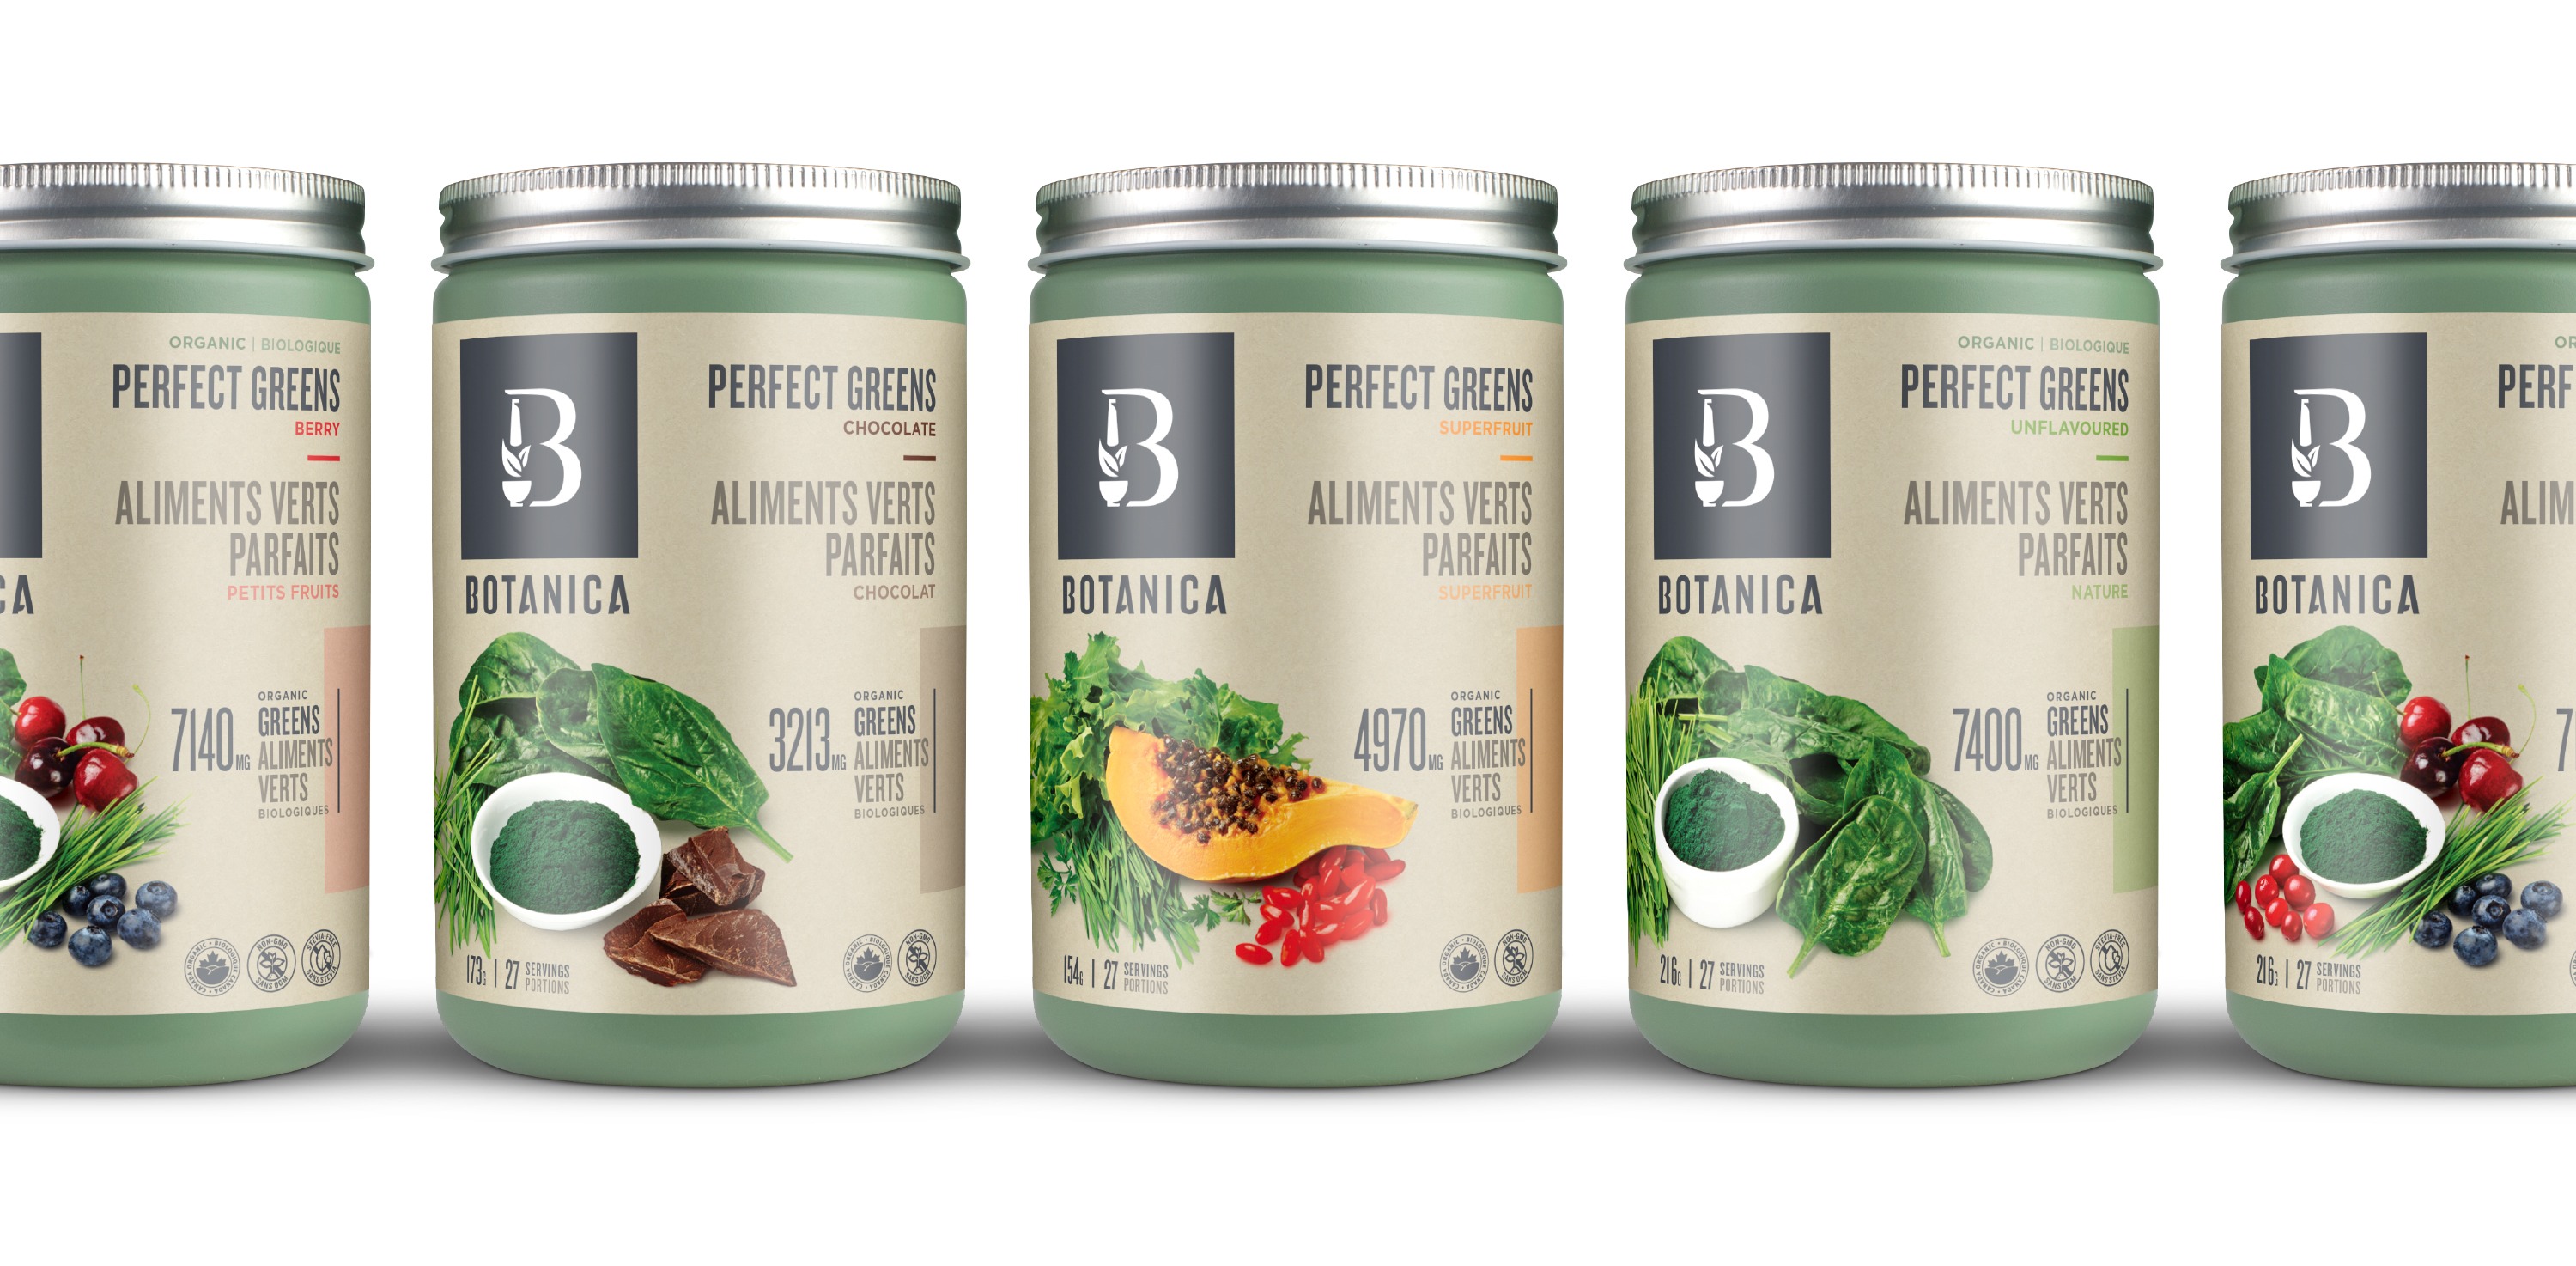 Botanica Greens Packaging | Dossier Creative | Natural Product Identity Design